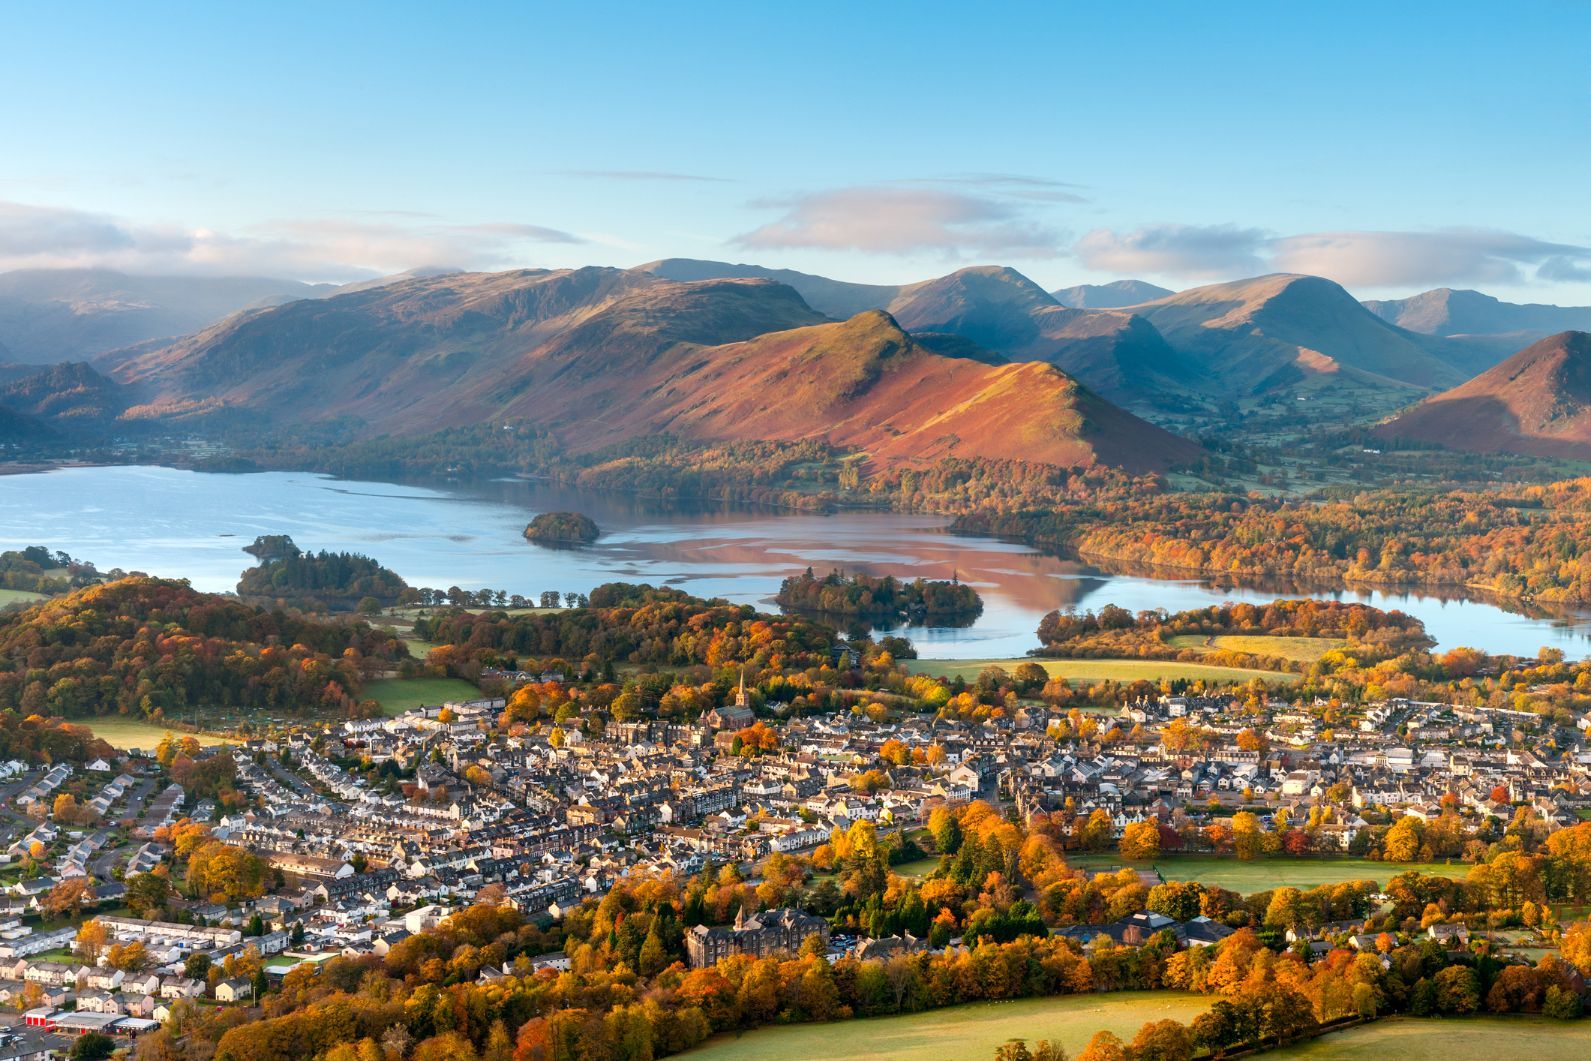 Looking over the small town of Keswick on the edge of Derwent Water in the Lake District National Park. Photo: Getty